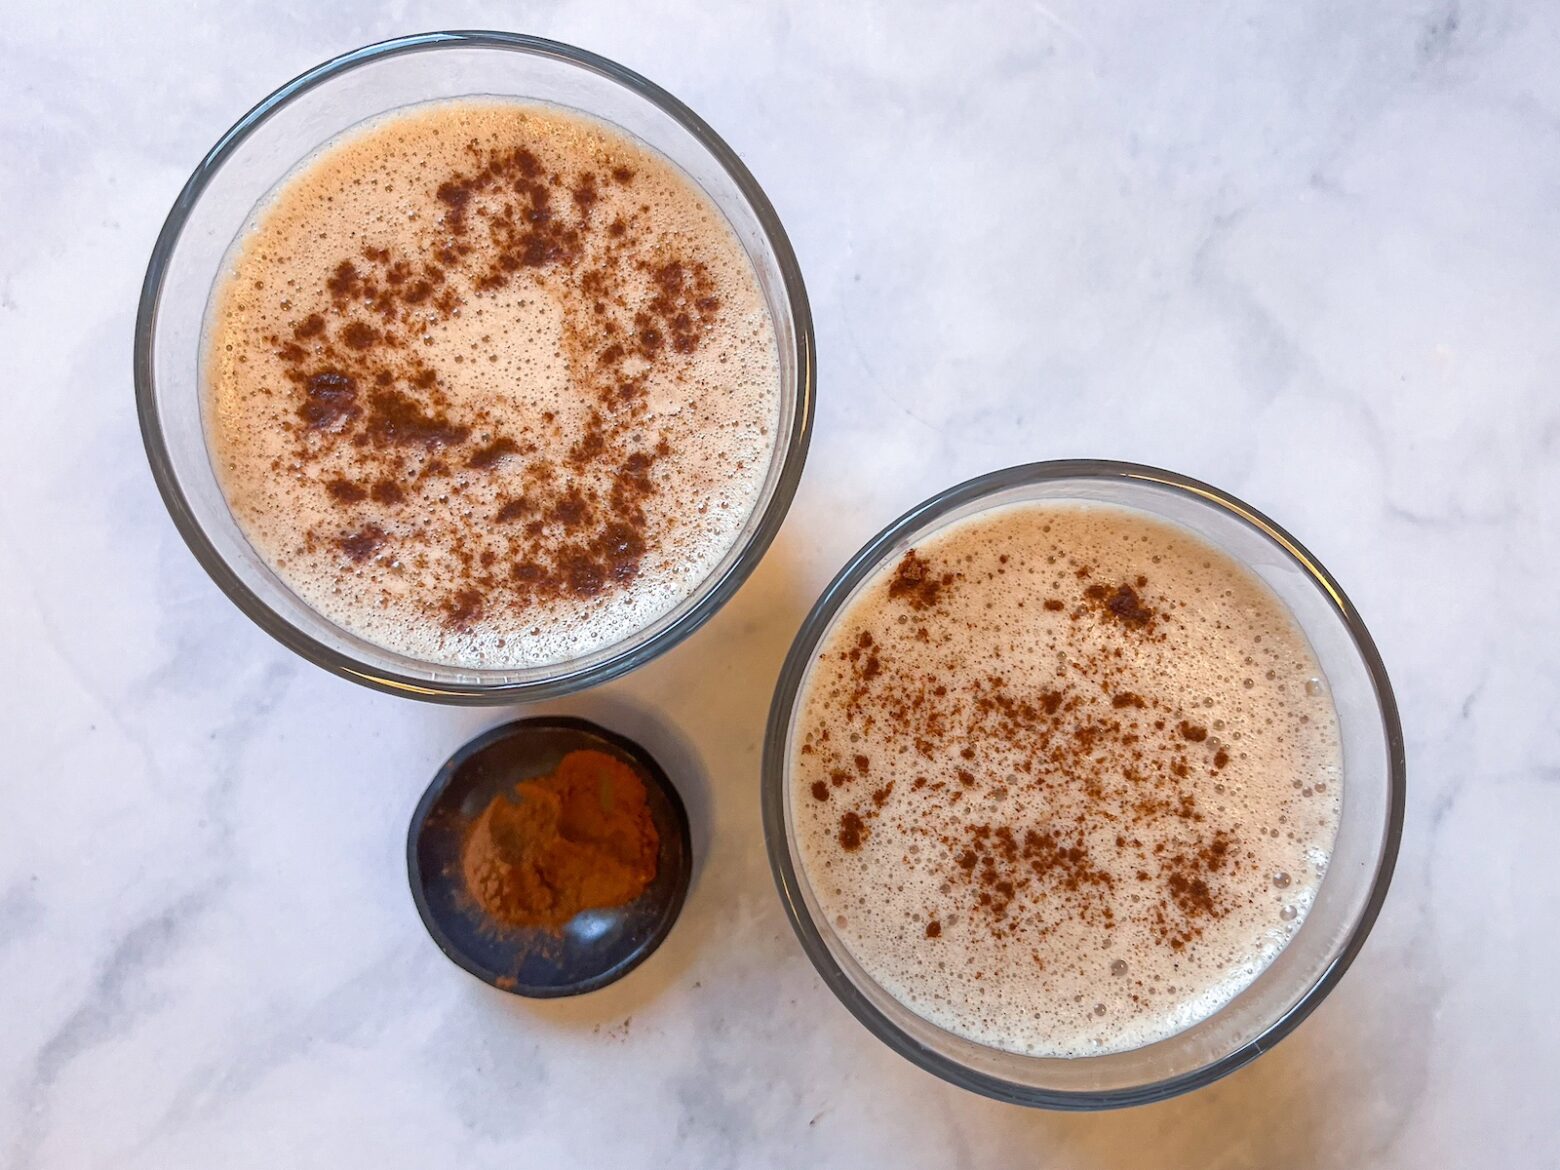 Two cacao reishi lattes in glasses ready to drink.